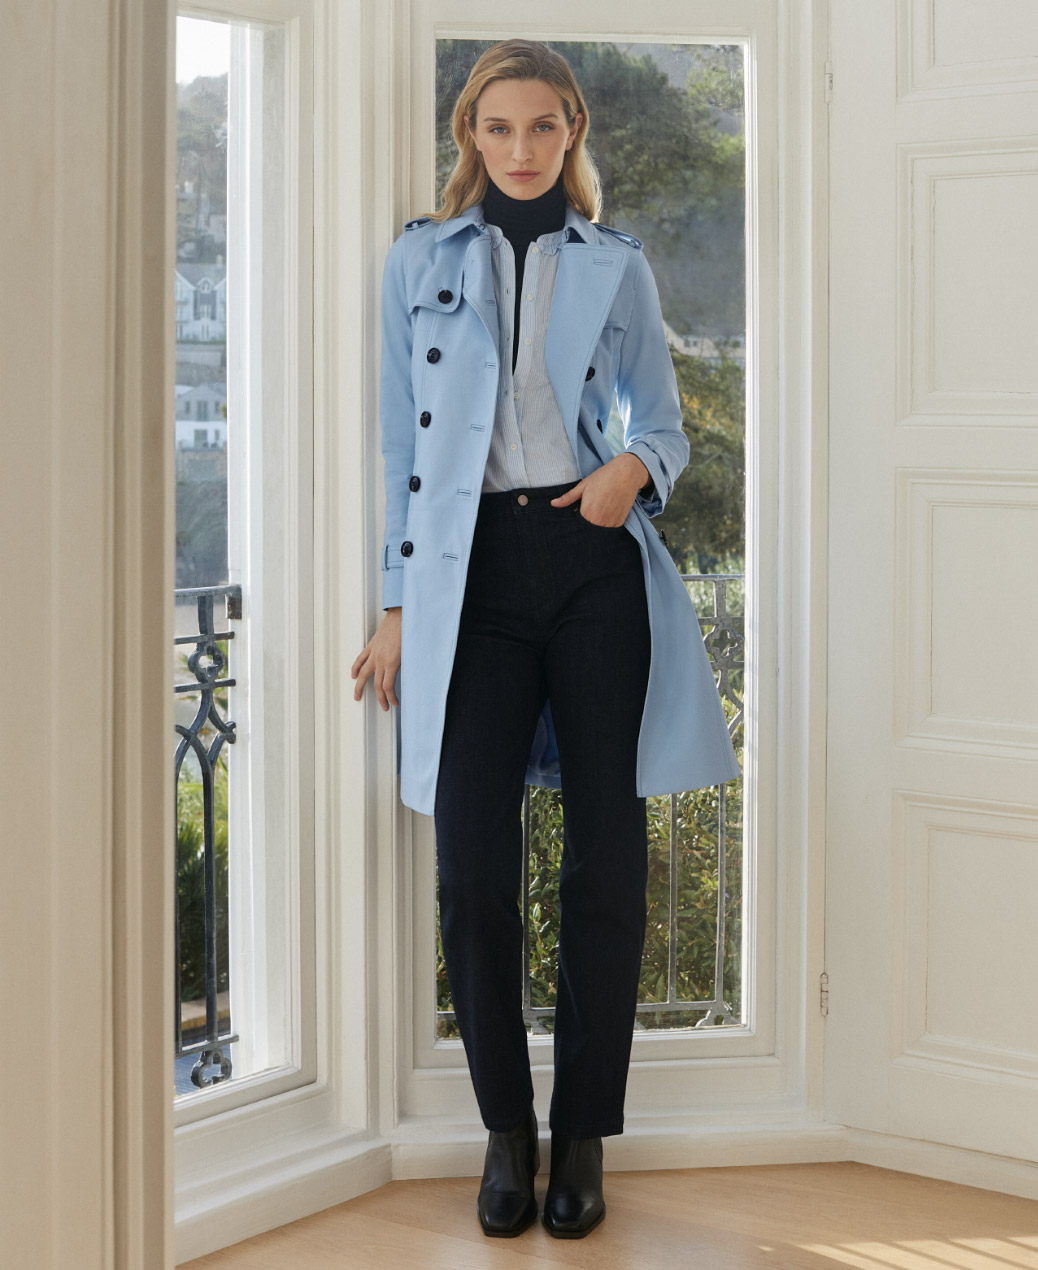 Hobbs model standing by a window wearing a pale blue trench coat